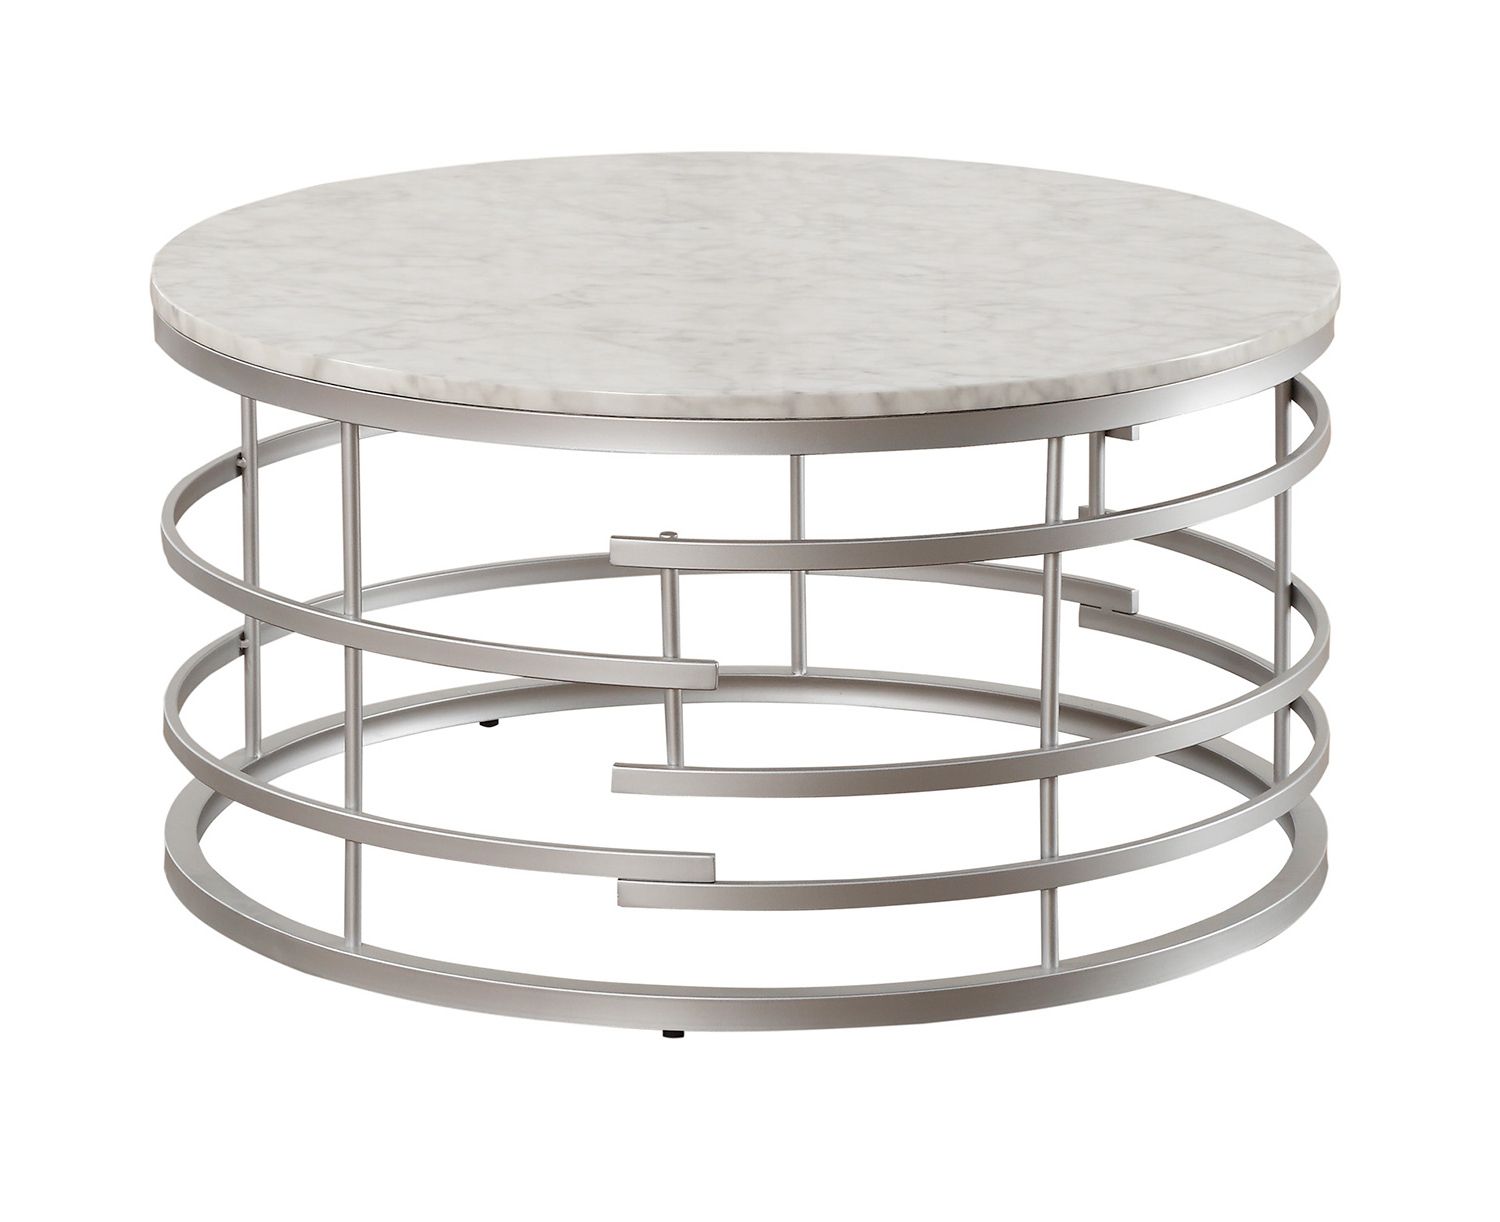 Faux White Marble And Metal Coffee Tables Pertaining To Most Up To Date Homelegance Brassica Round Cocktail/coffee Table With Faux (View 20 of 20)